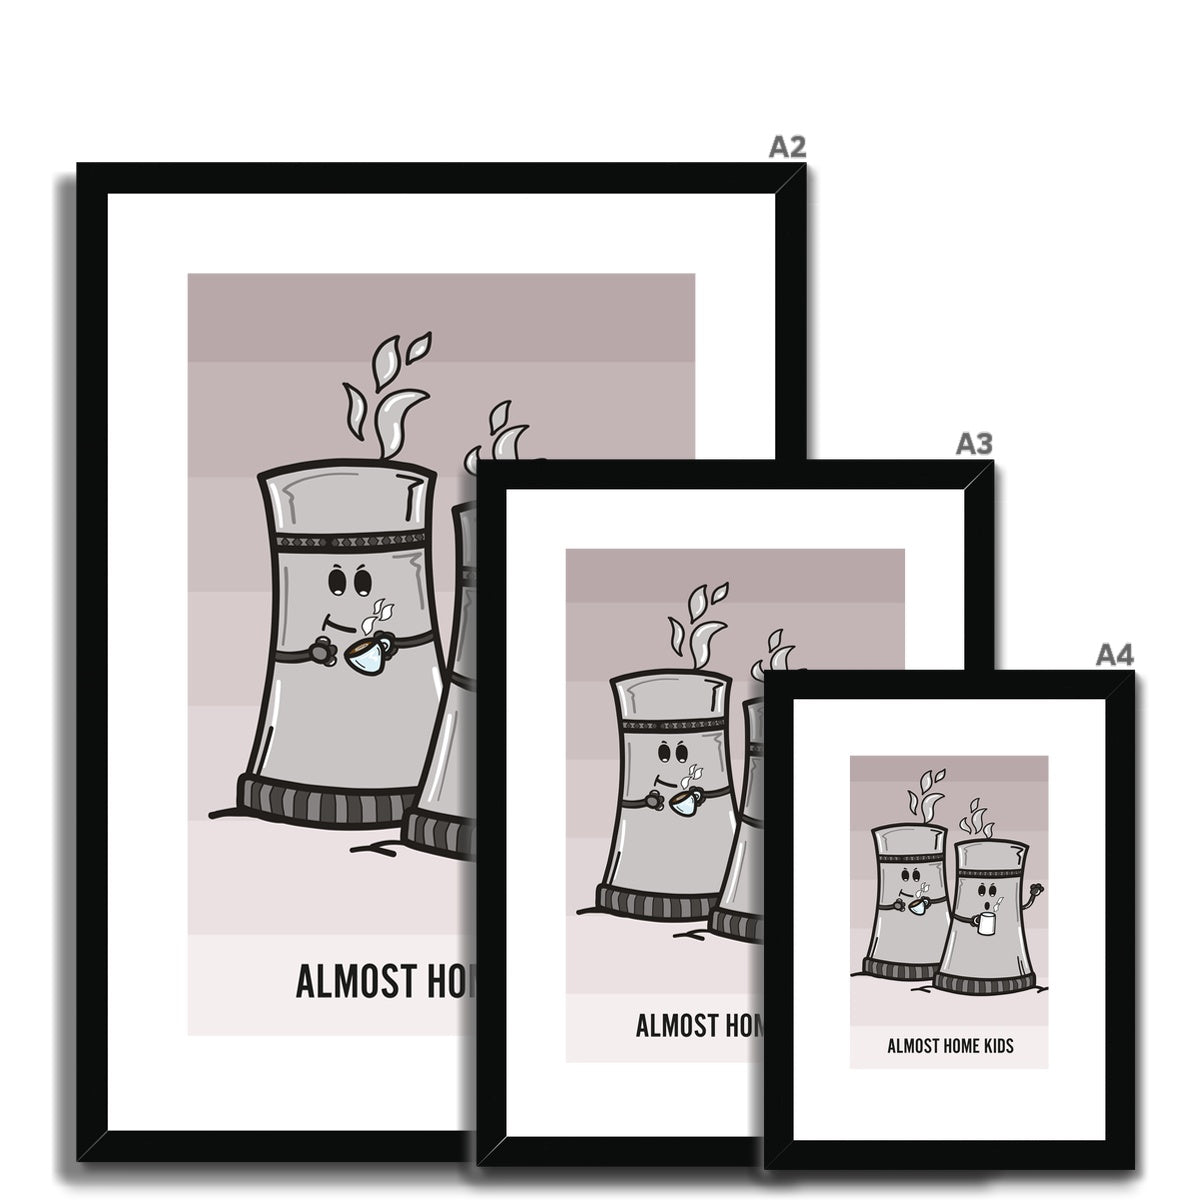 Almost Home Kids Framed & Mounted Print